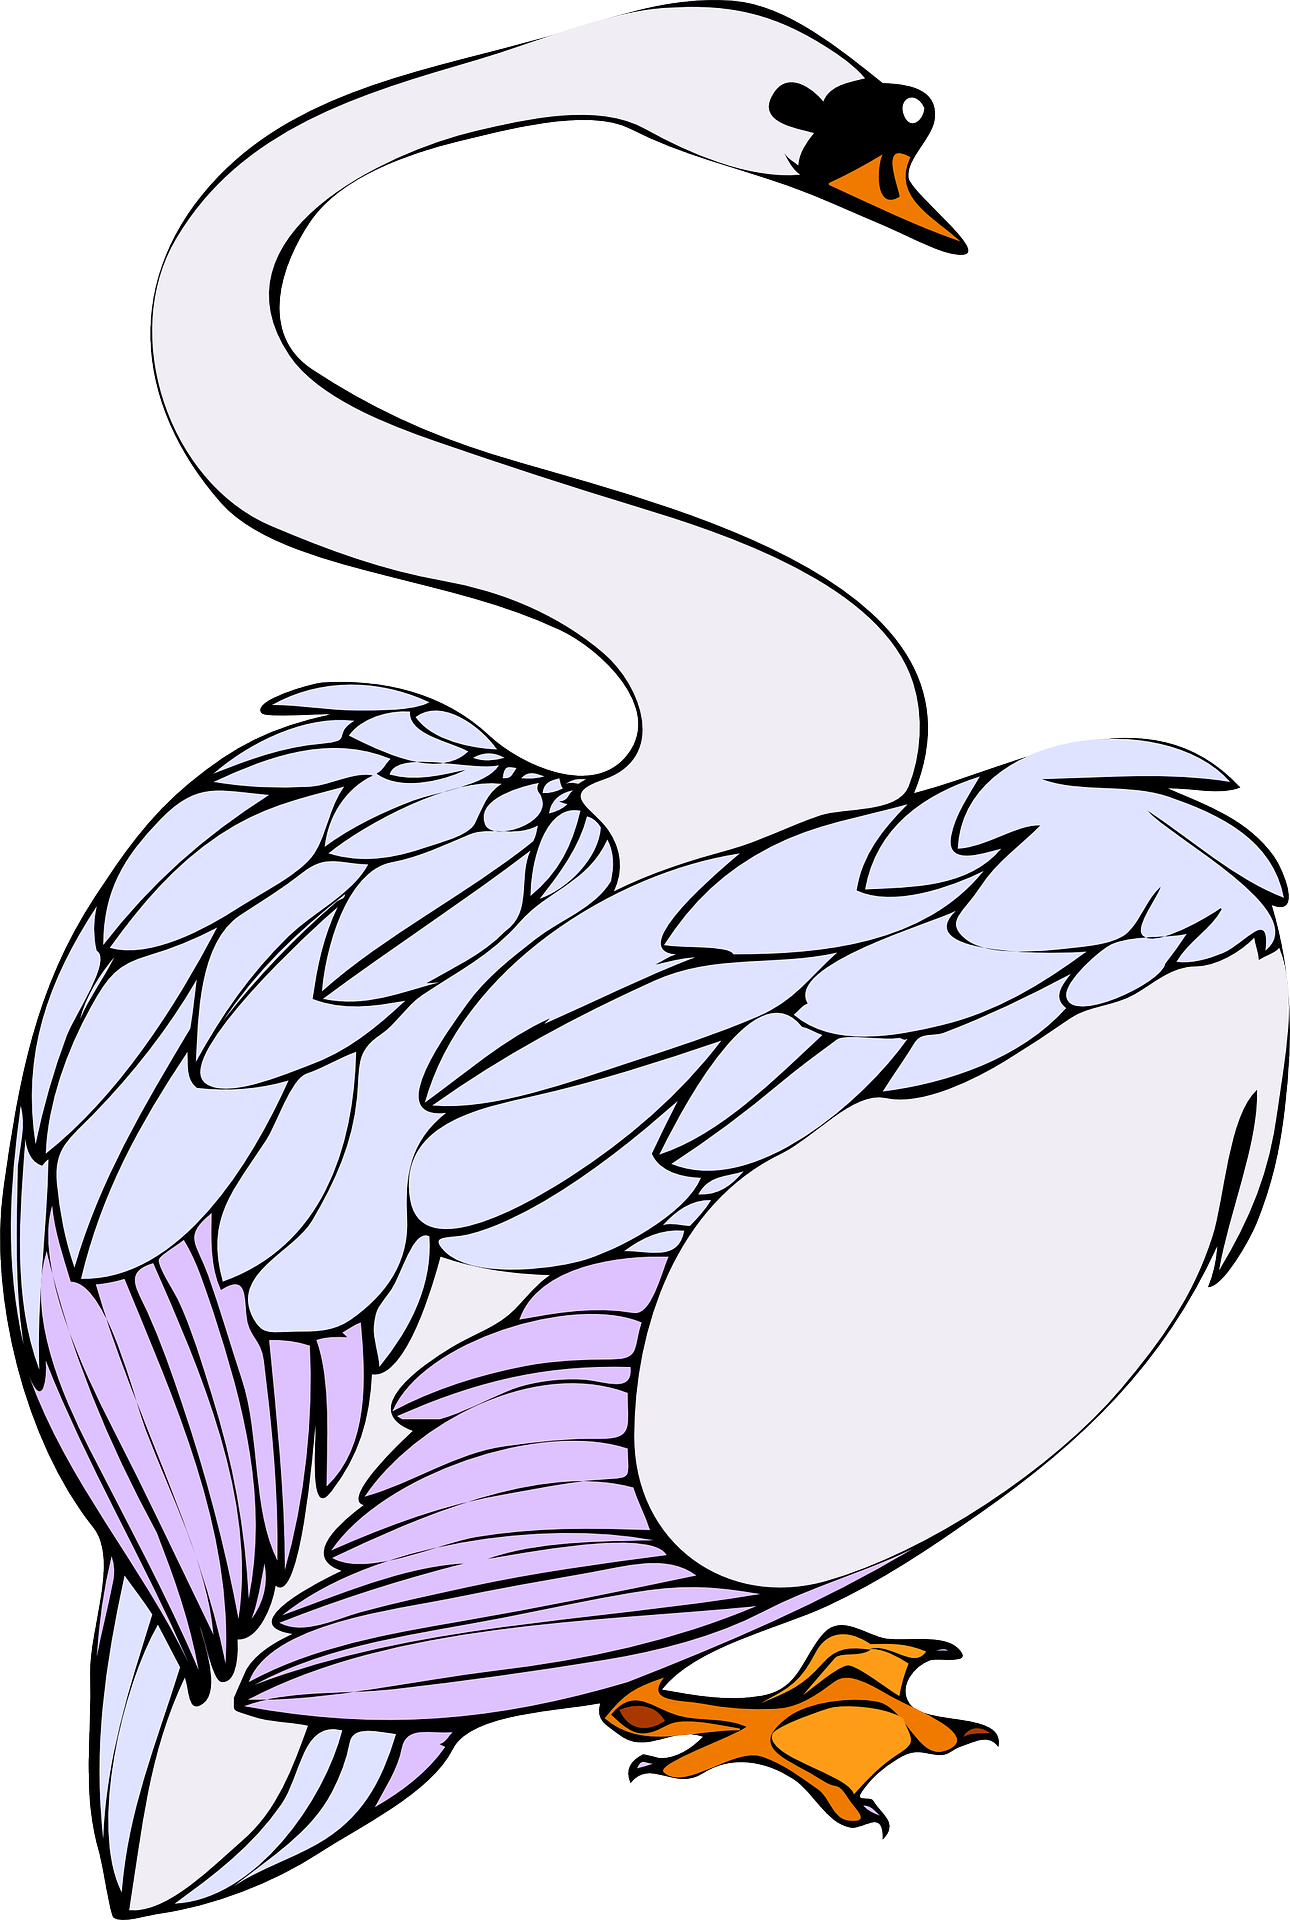 Drawing of a white swan on a white background free image download